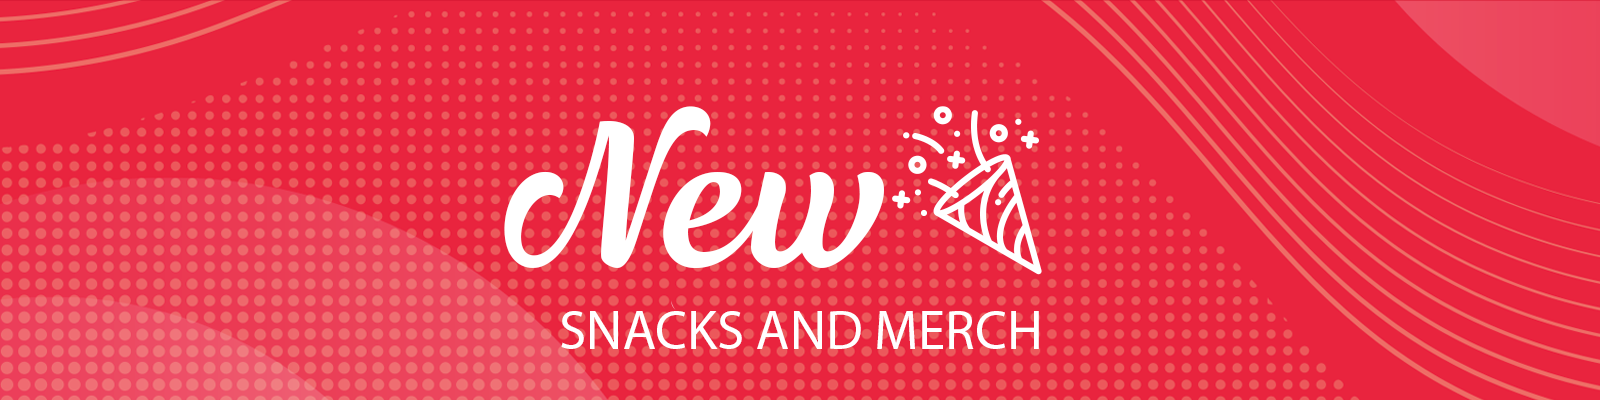 A red background with the words `` new snacks and merch '' on it.